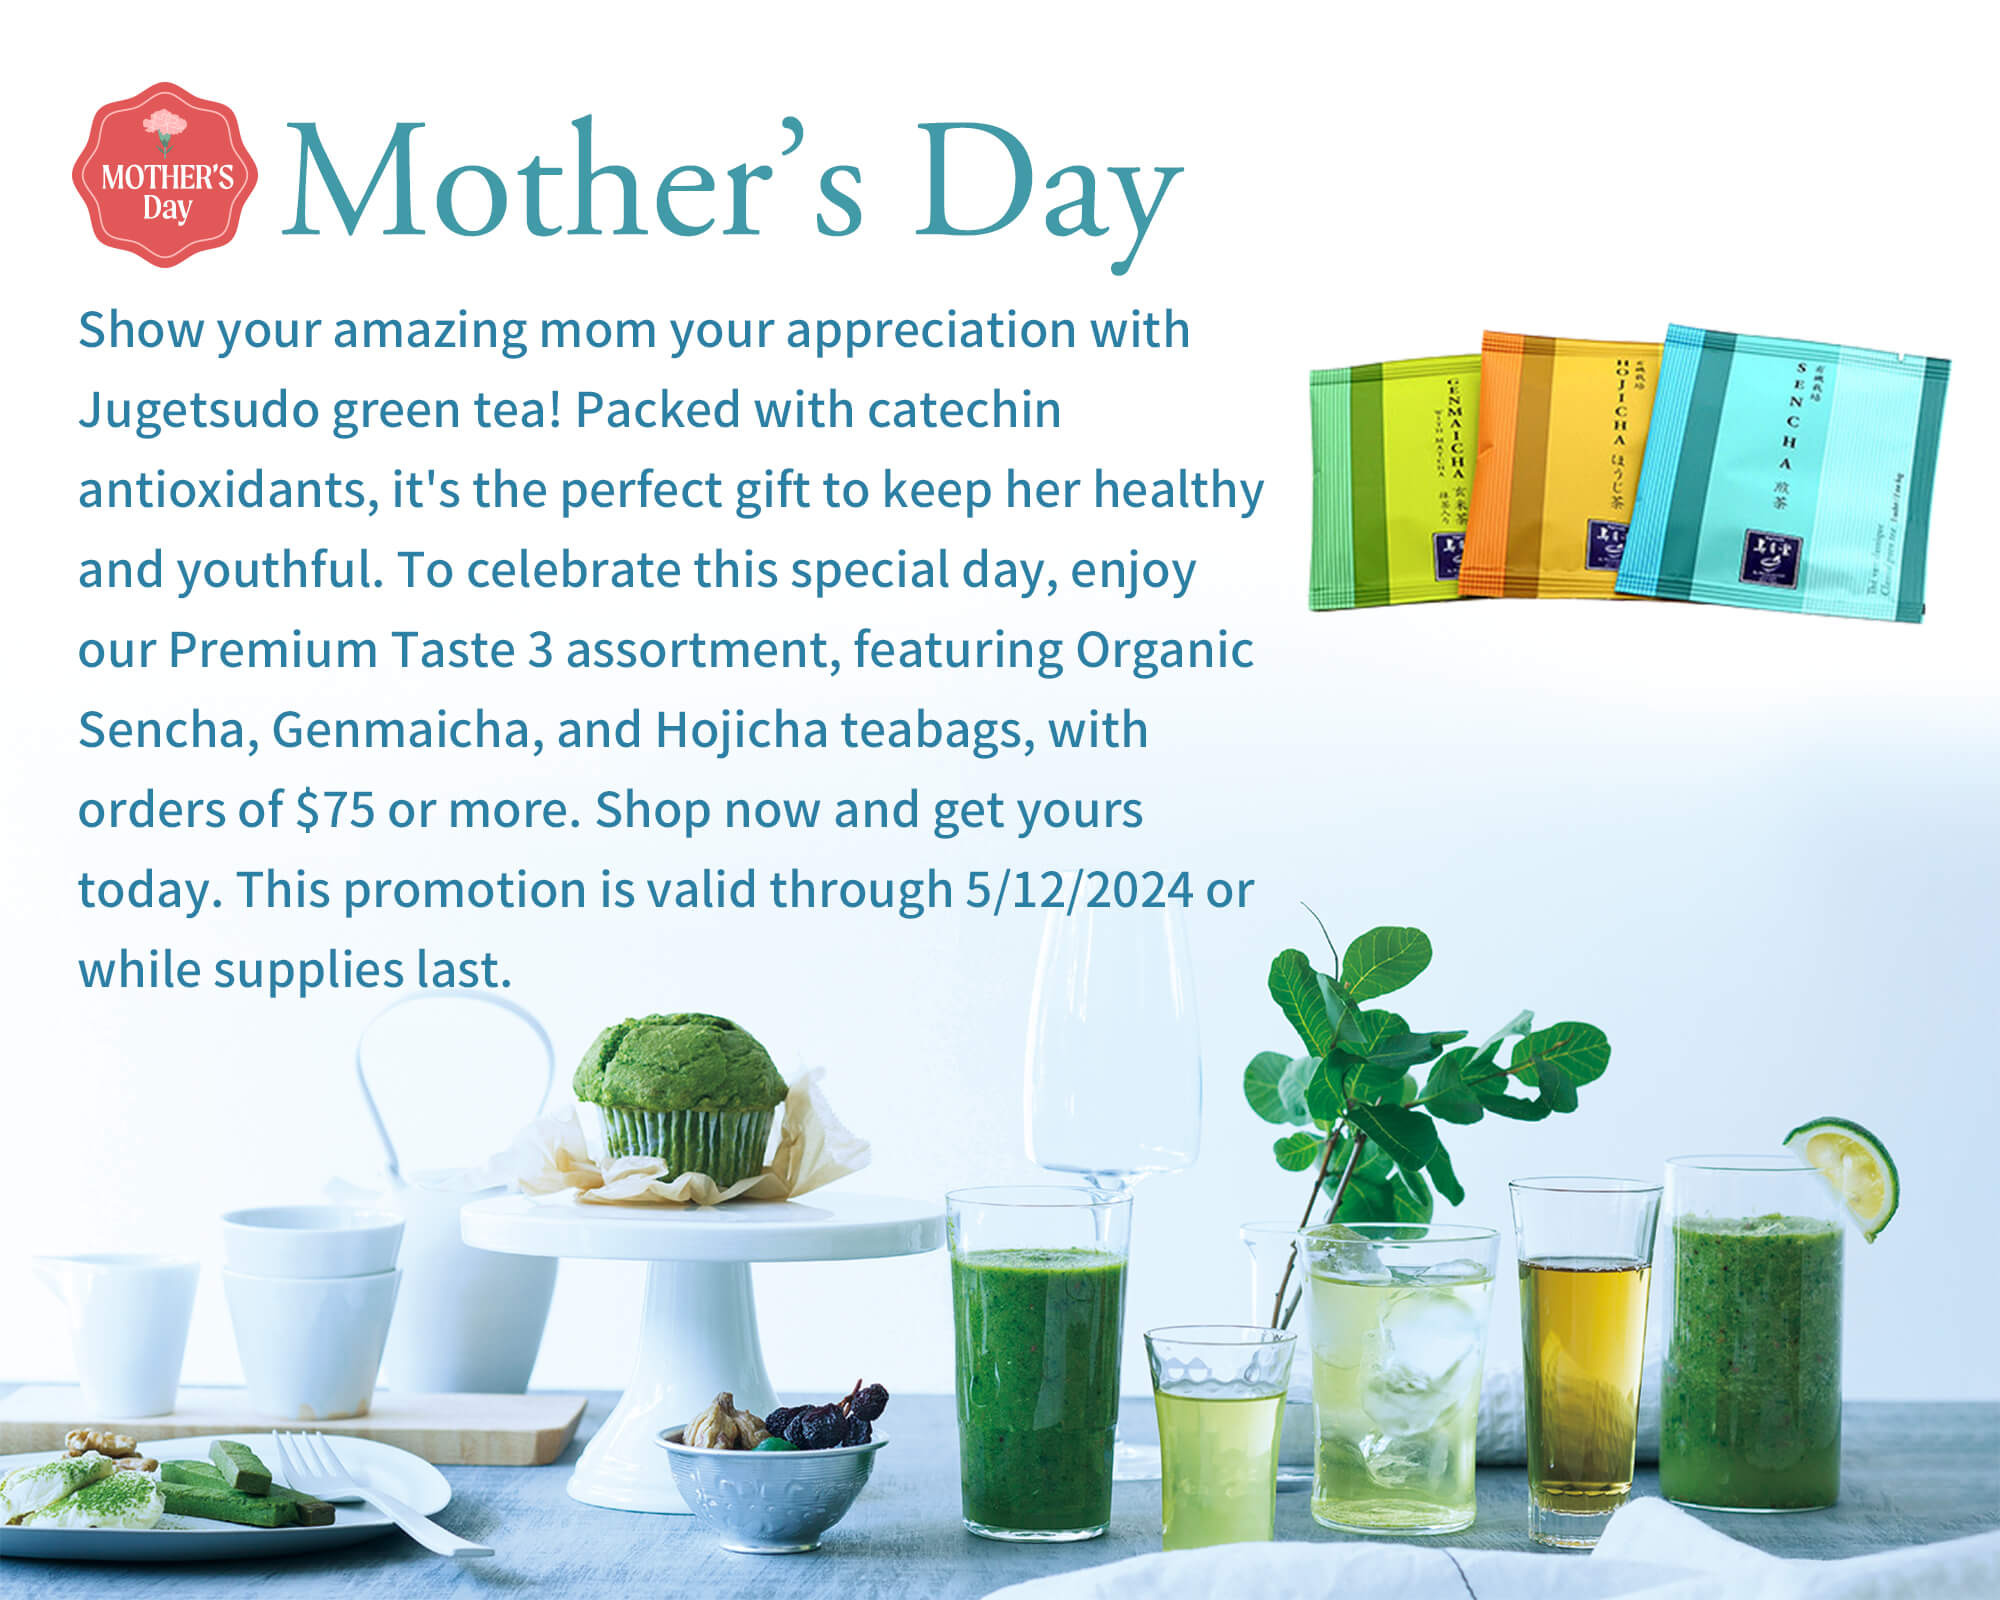 Mother’s Day  Show your amazing mom your appreciation with Jugetsudo green tea! Packed with catechin antioxidants, it's the perfect gift to keep her healthy and youthful. To celebrate this special day, enjoy our Premium Taste 3 assortment, featuring Organic Sencha, Genmaicha, and Hojicha teabags, with orders of $75 or more. Shop now and get yours today. This promotion is valid through 5/12/2024 or while supplies last.